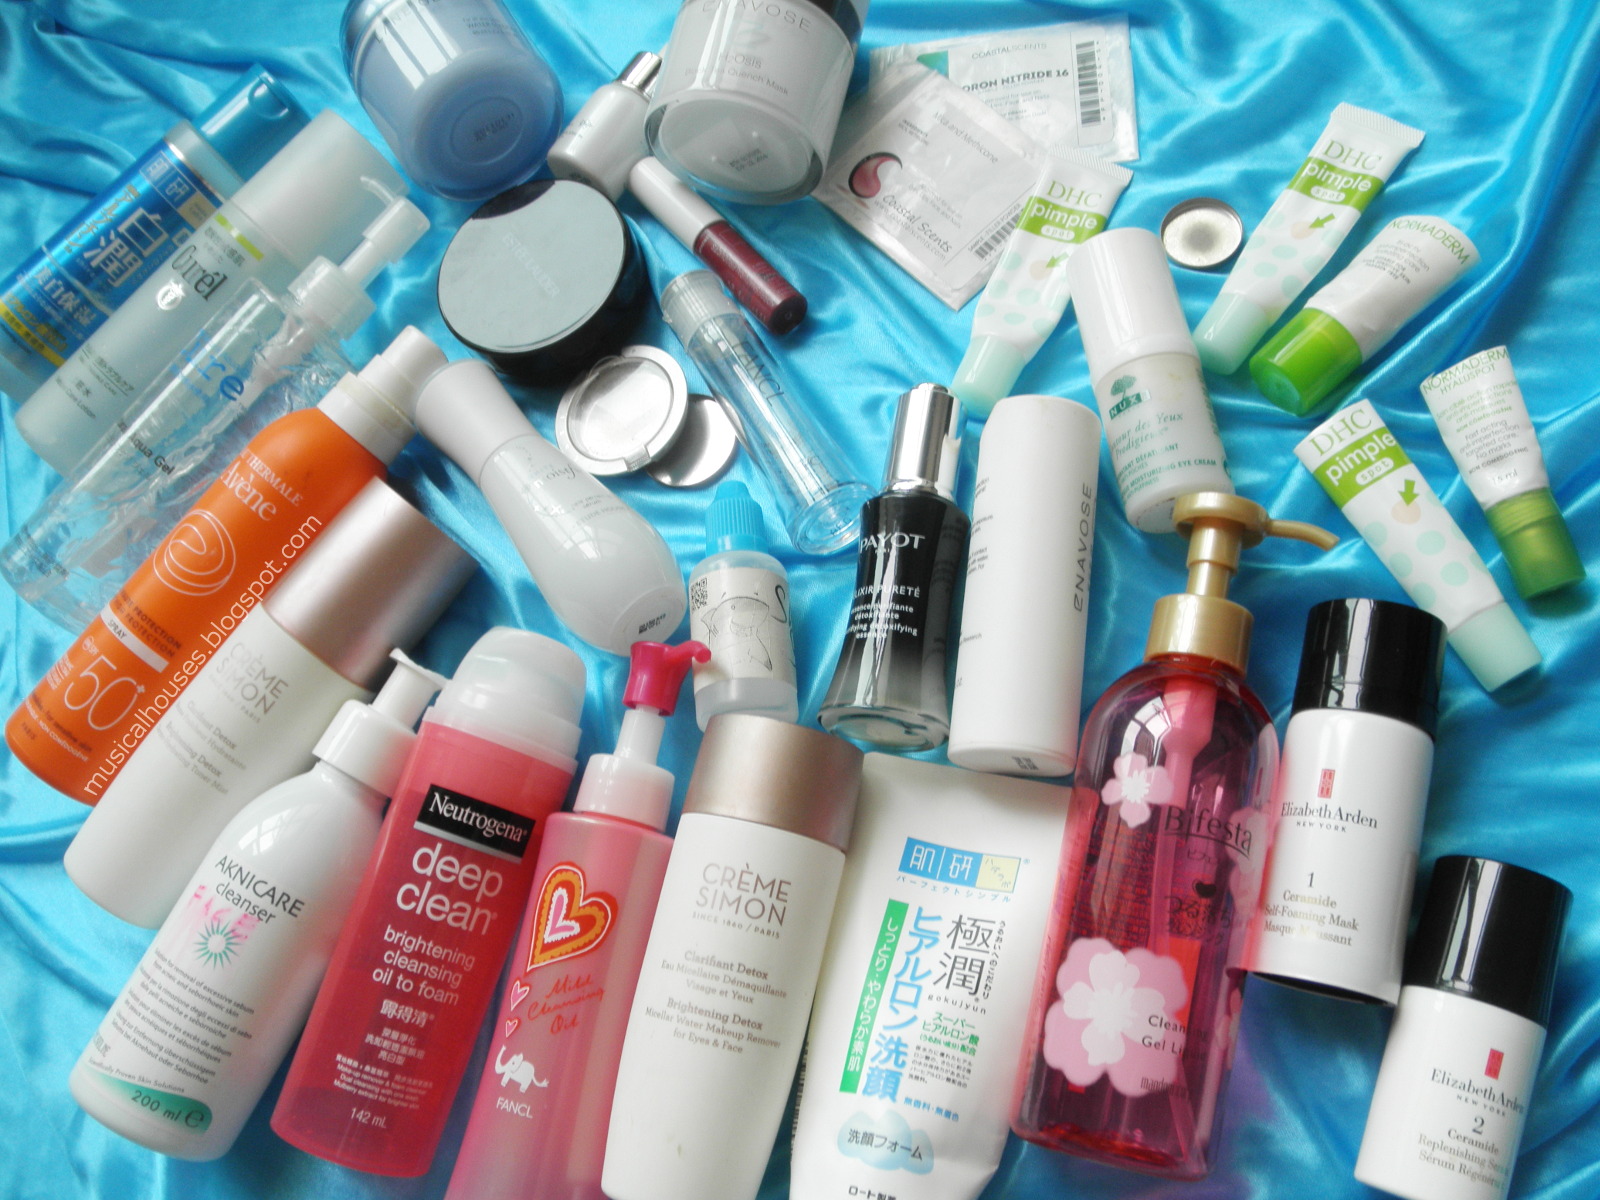 Mega Empties Post Part 1: Acne Skincare, Lotions, Cleansers, Oil Makeup  Removers - of Faces and Fingers